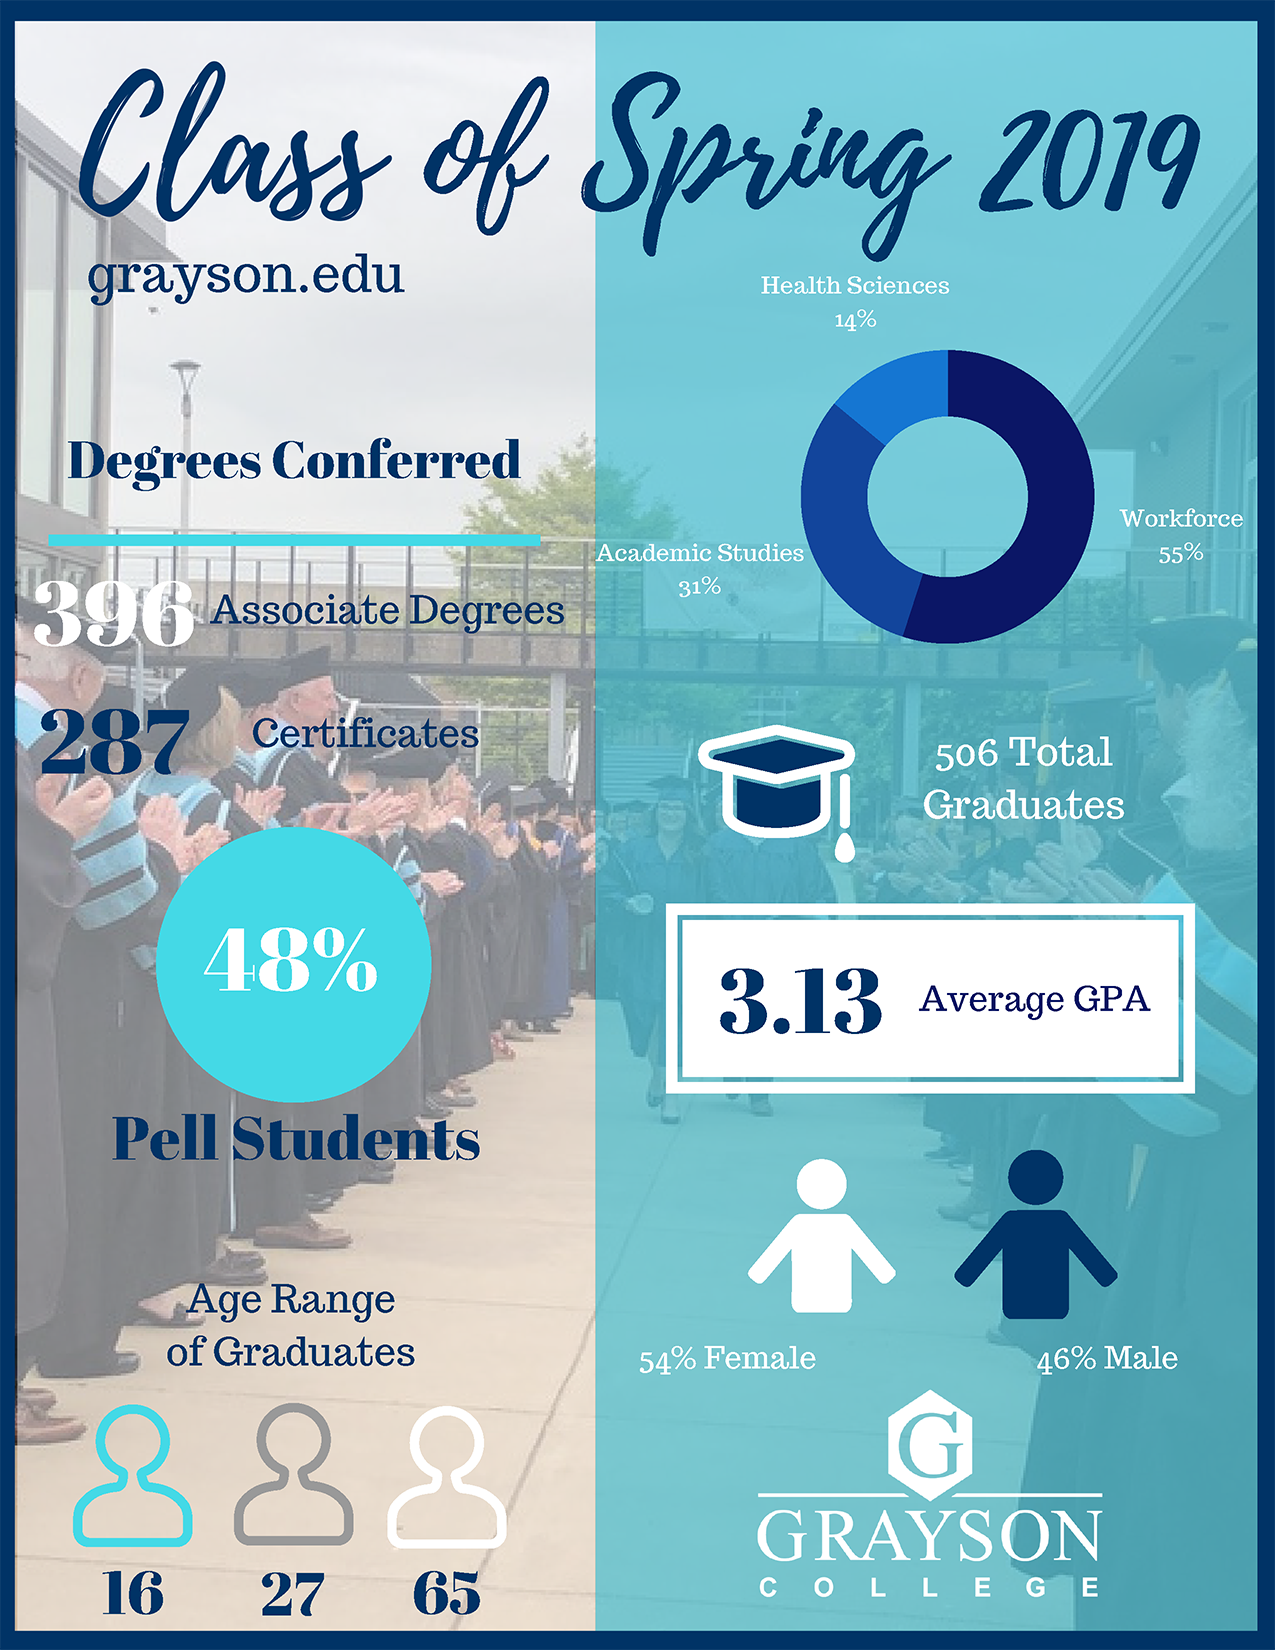 Class of spring 2019. 396 associate degrees conferred, 287 Certificates awarded. 48% Pell Students. Age ranges from 16 to 65. 14% Health sciences, 31% Academic Studies, 55% Workforce. 506 Total Graduates. 3.13 Average GPA. 54% Female 46% Male.